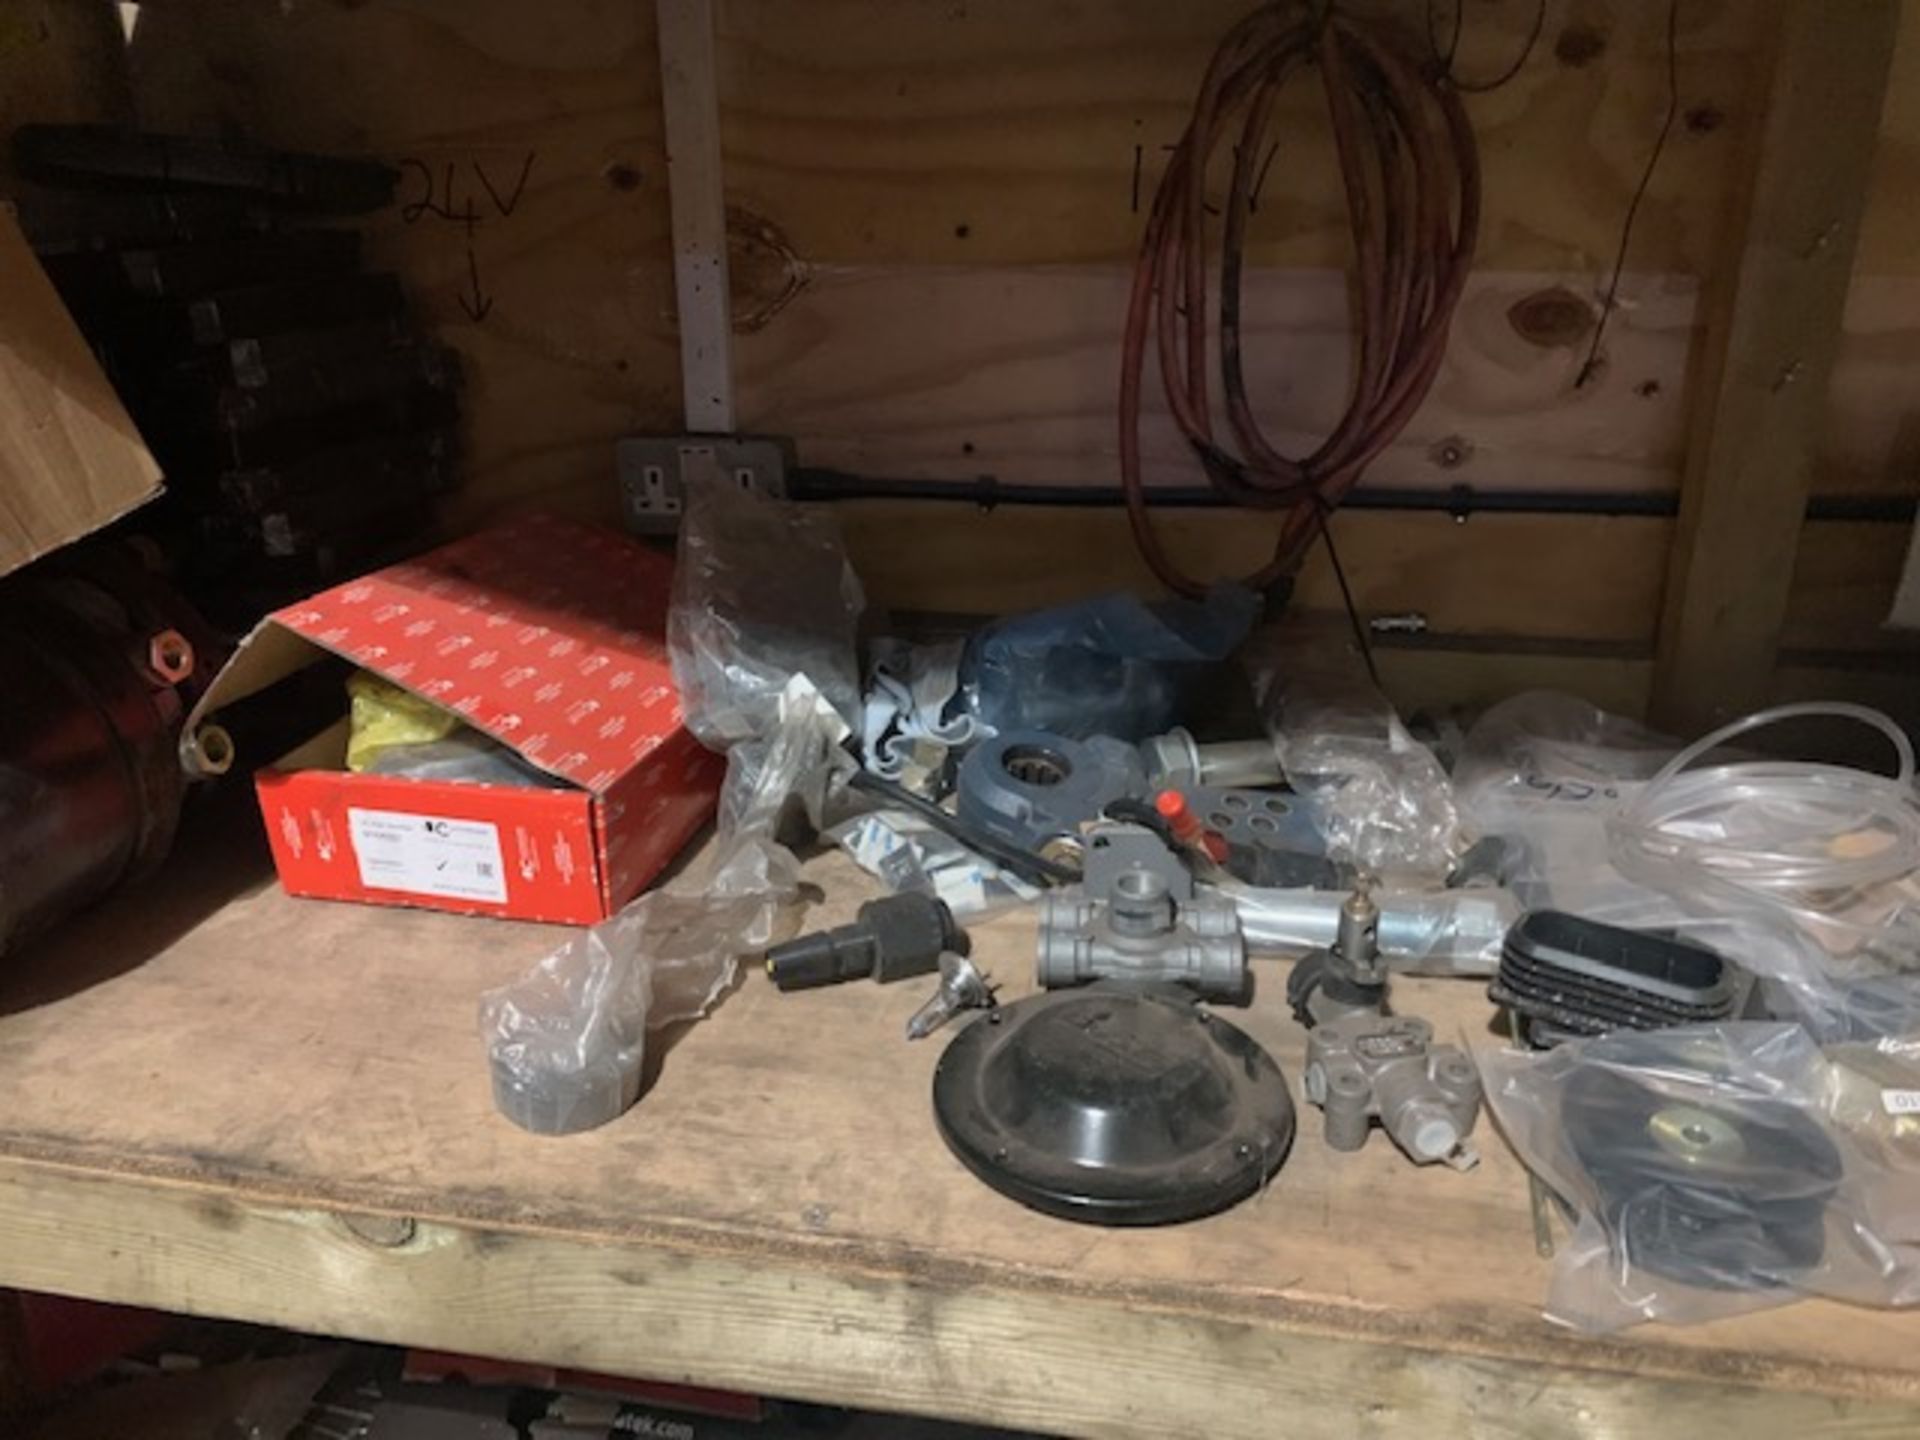 Contents of parts room to include filters, hoses, brake pads, abrasive discs, plastic panel parts, - Image 4 of 13